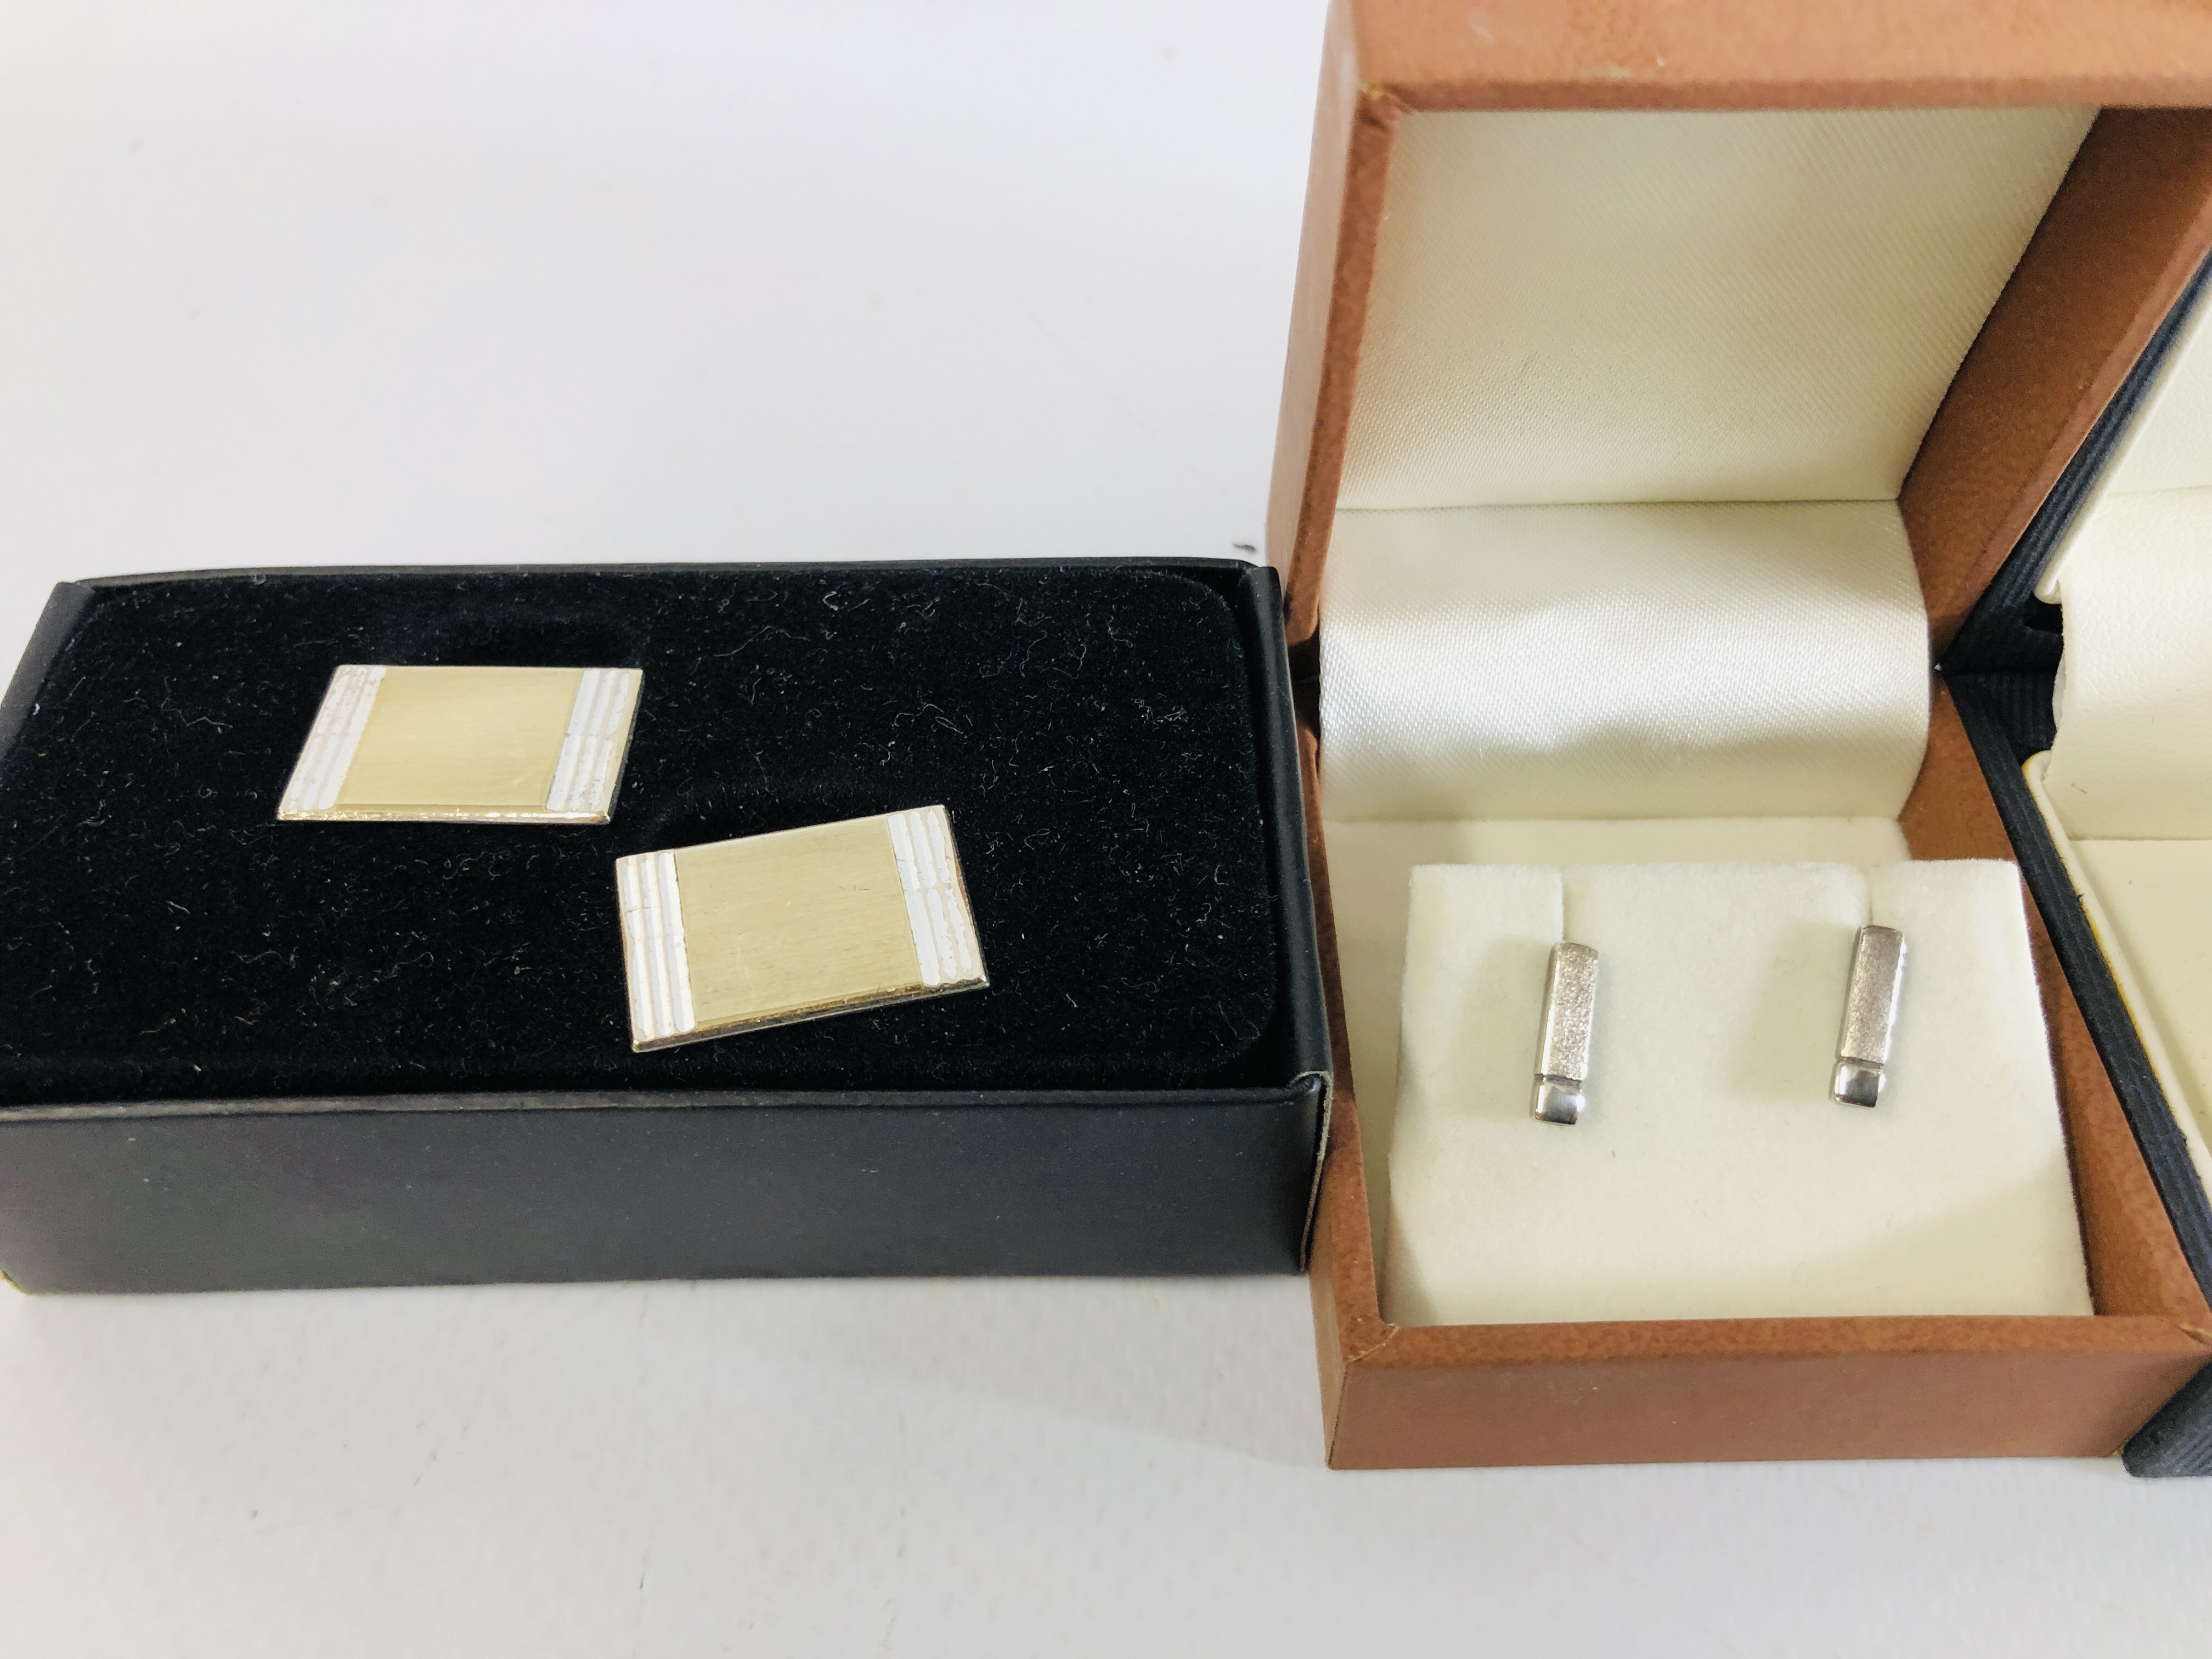 SILVER EARRINGS AND CUFF LINKS TO INCLUDE PAIR OF ASTON MARTIN CUFF LINKS - Image 5 of 5